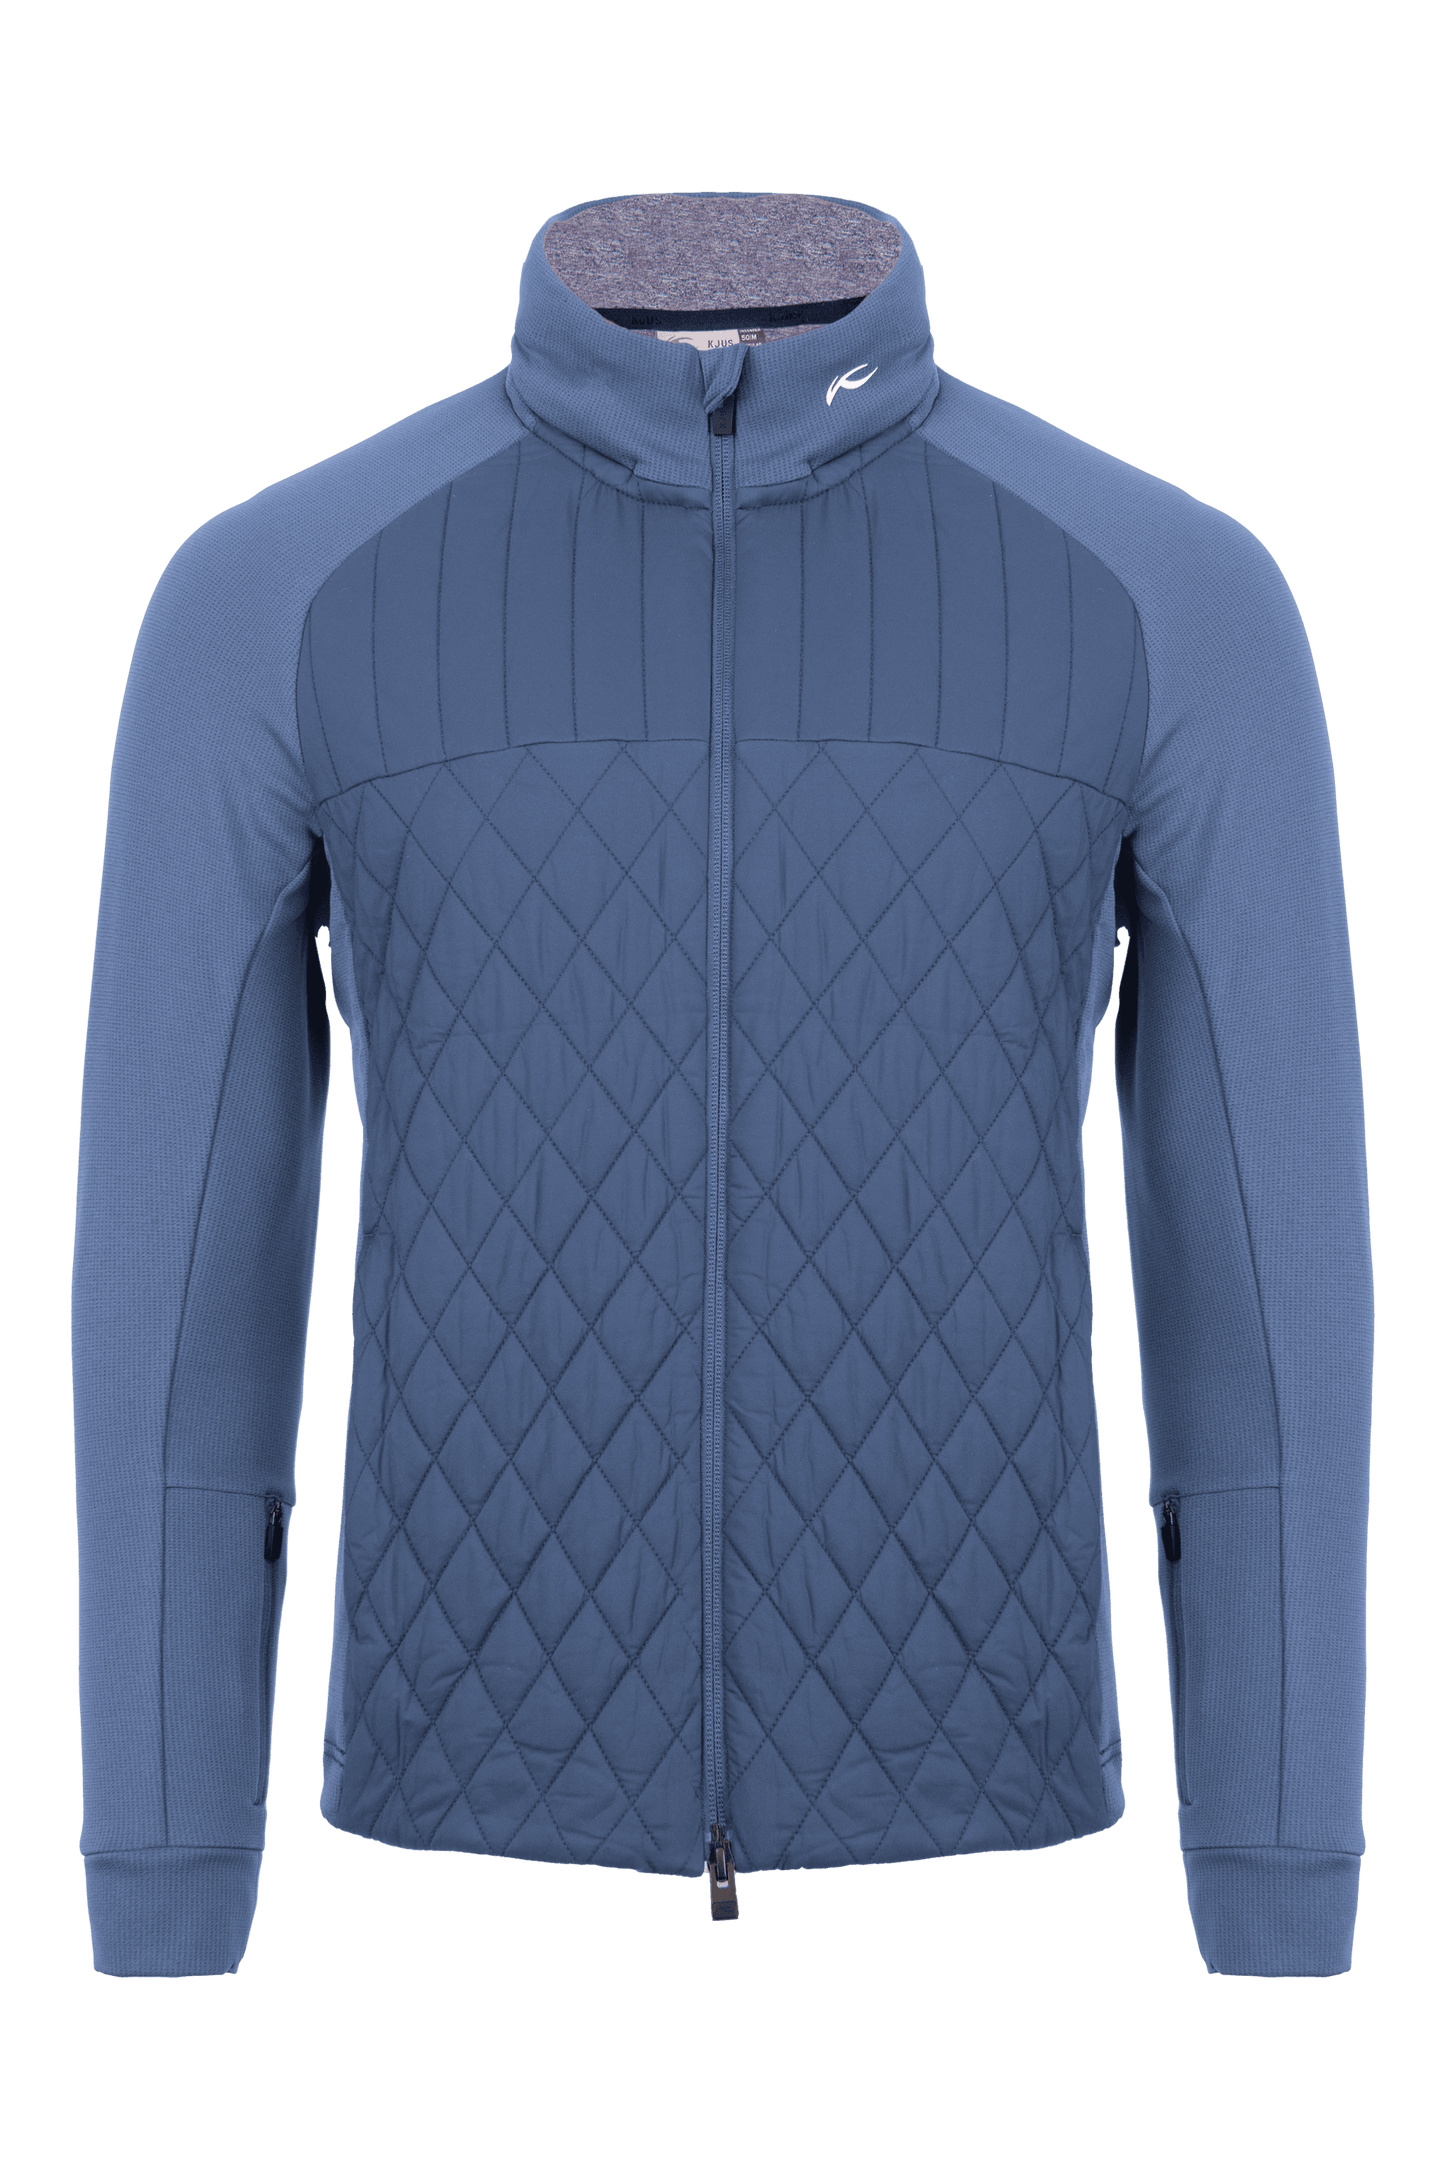 Men's Pike Jacket by Kjus - The Luxury Promotional Gifts Company Limited